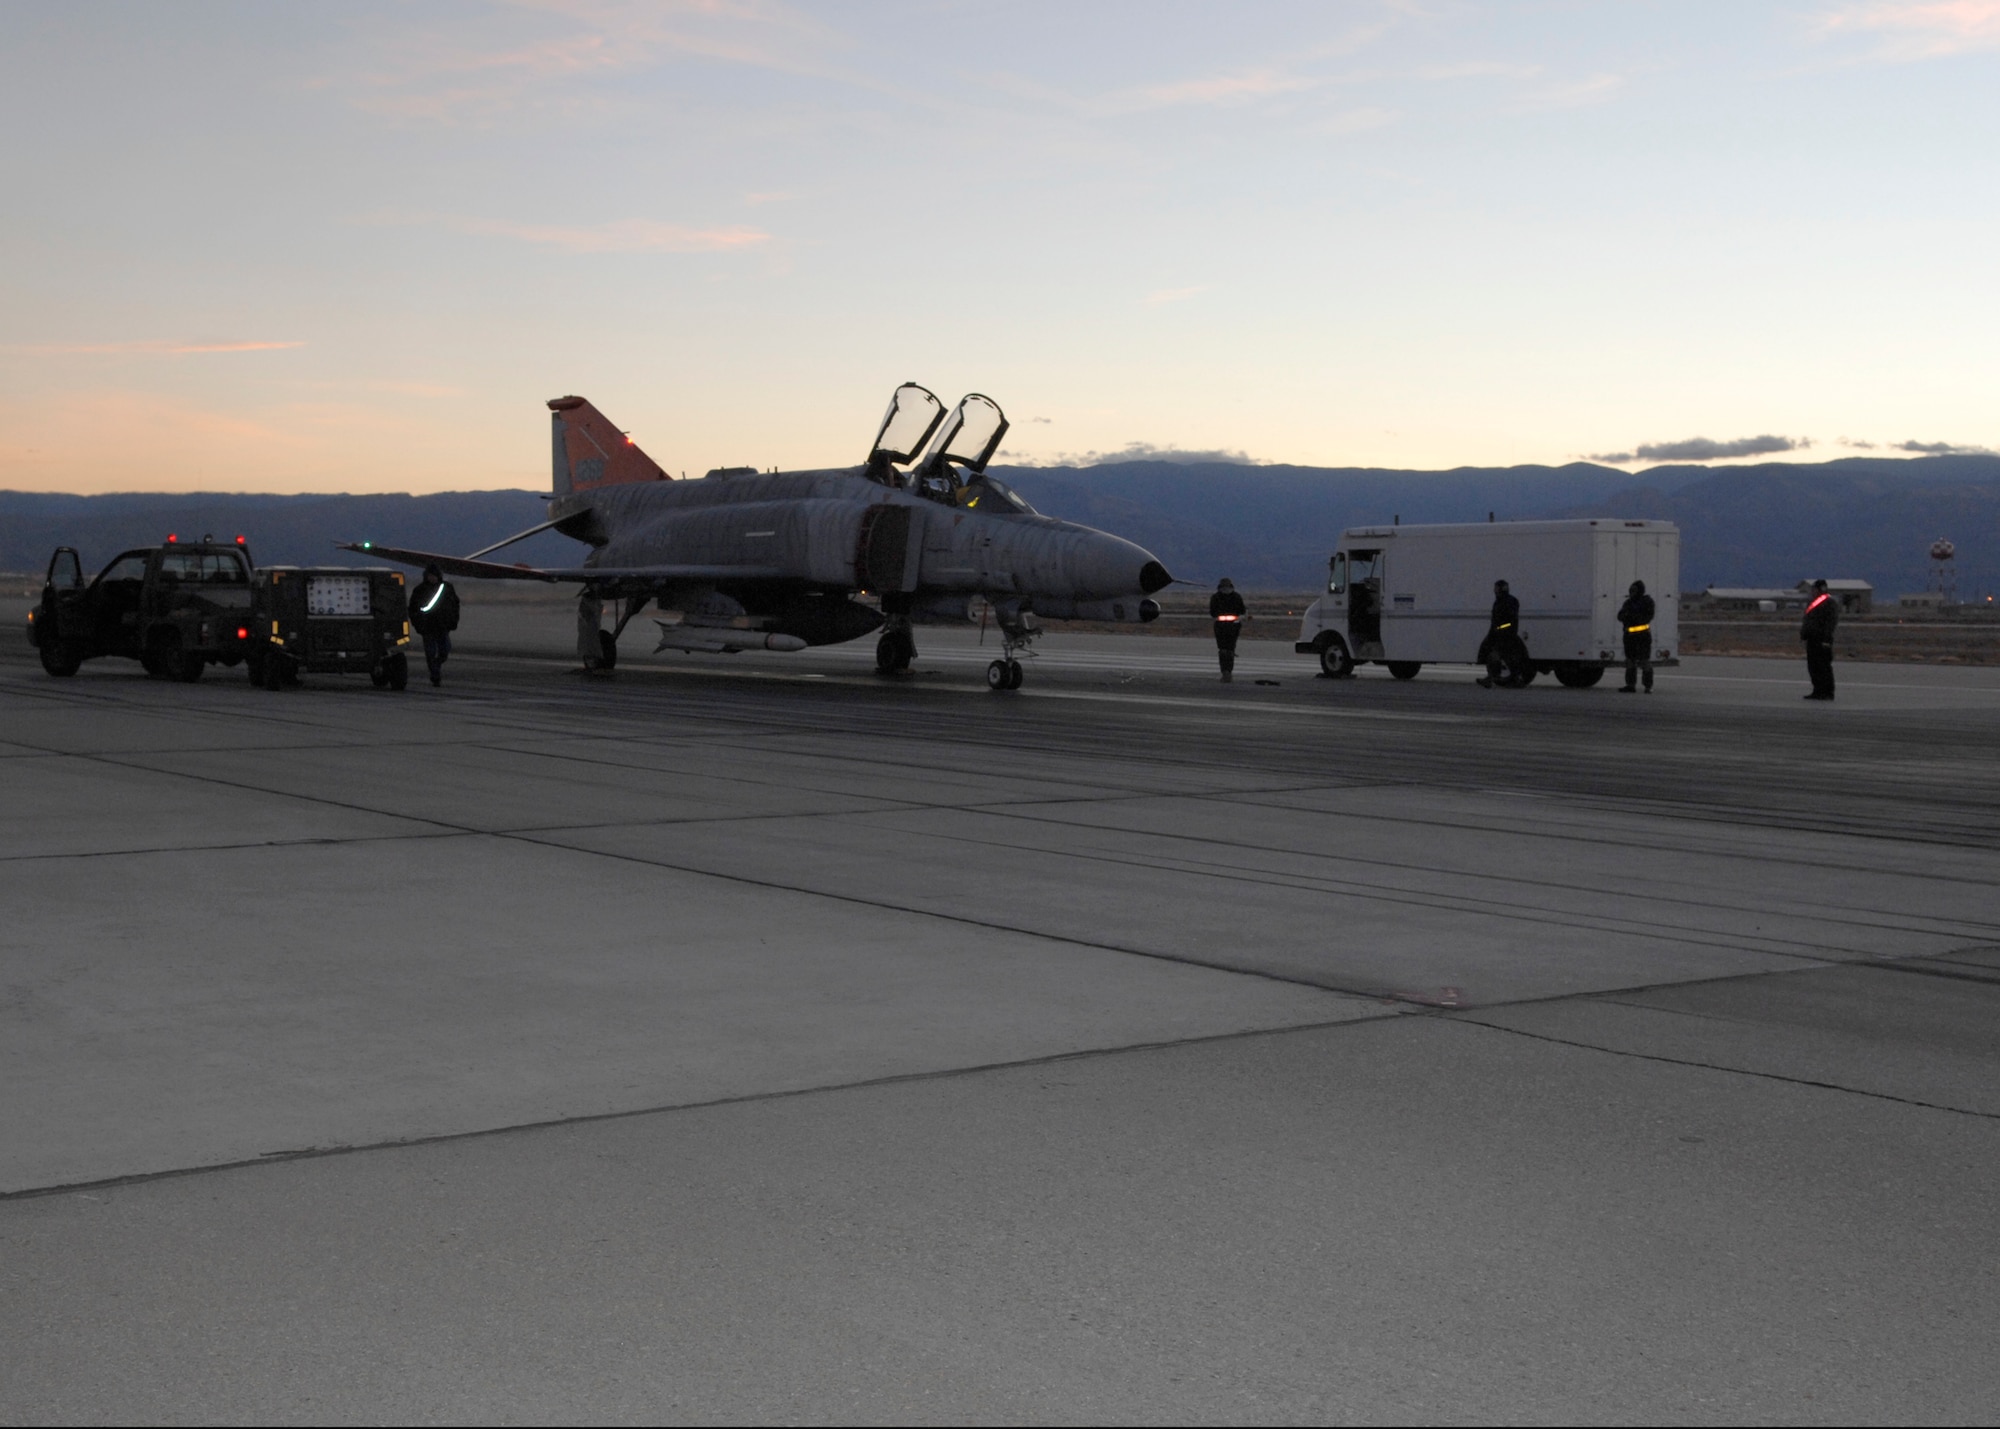 The QF-4 drone gets ready for launch on Holloman Air Force Base, N.M. on Jan. 09, 2008. This was the first air to ground missile fired off the unmanned drone. (U.S. Air Force photo/Airman 1st Class Rachel A. Kocin)